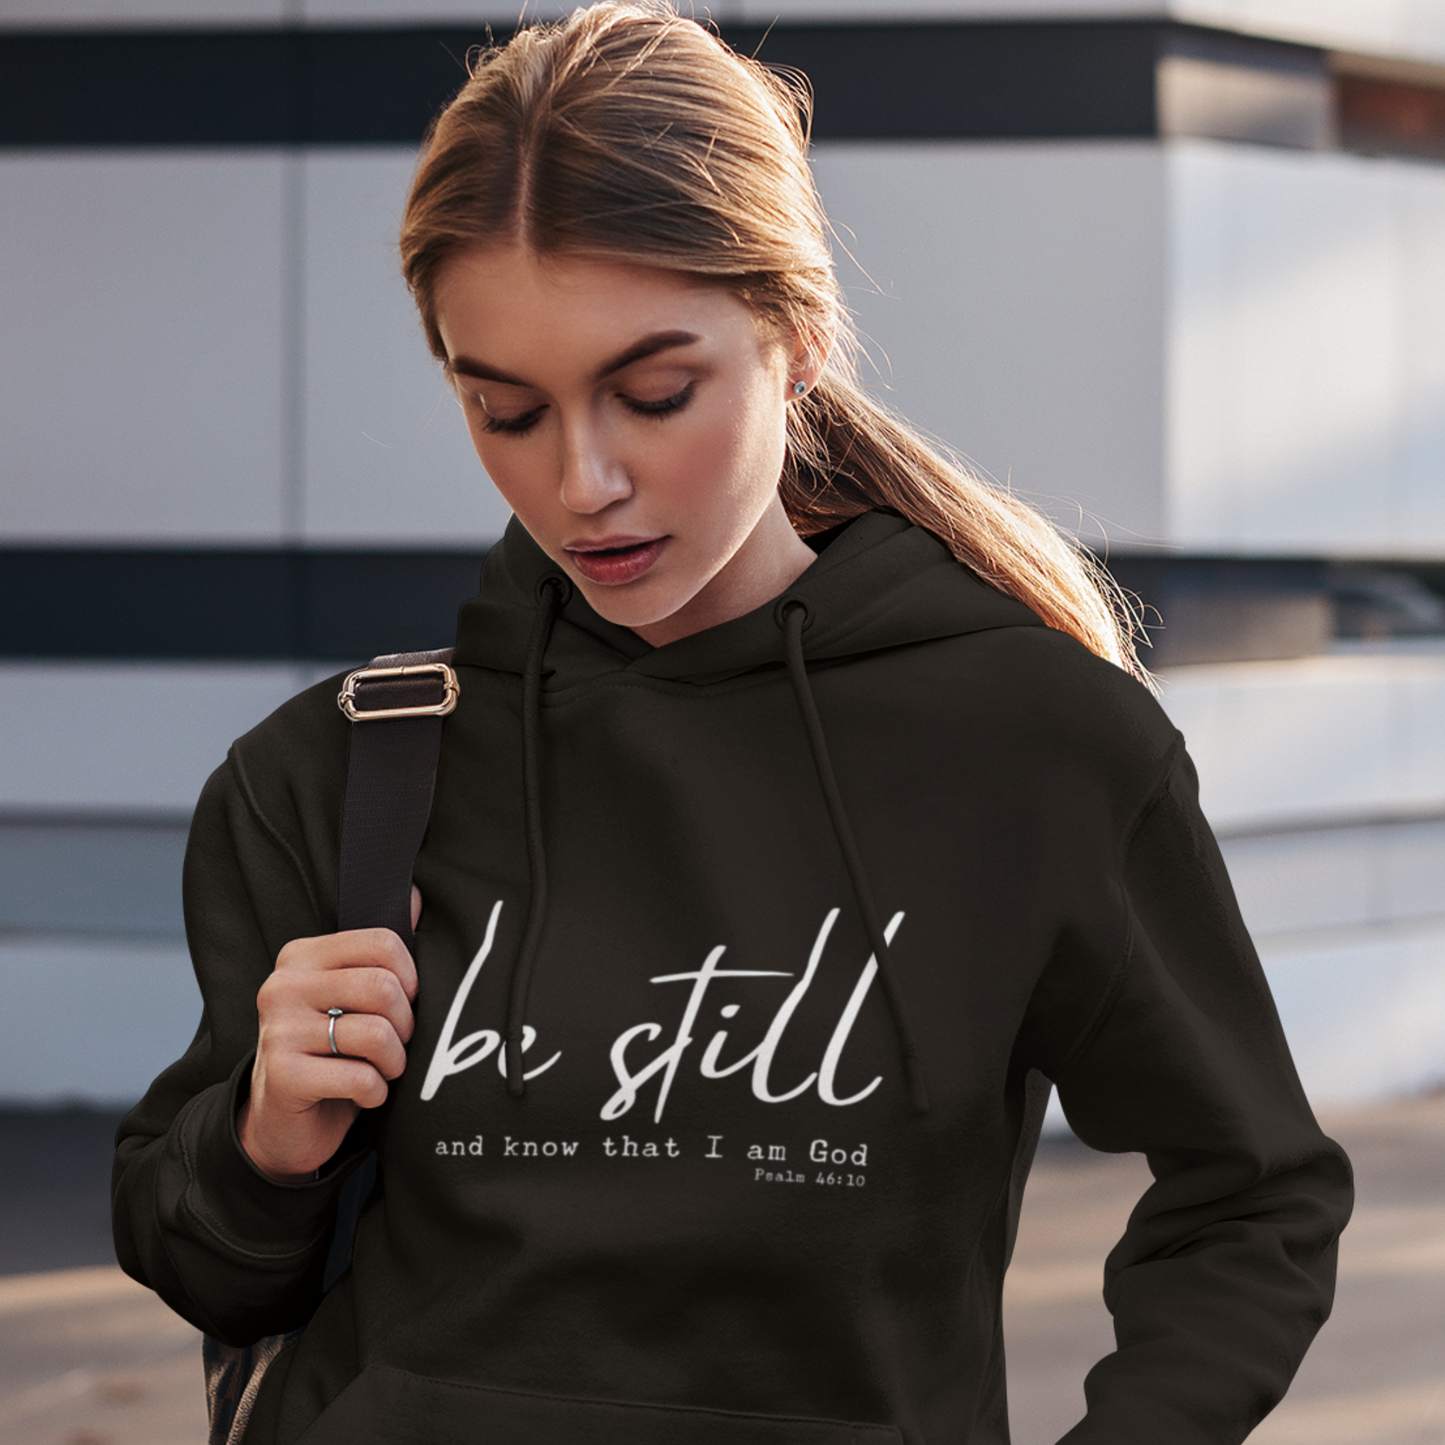 Unisex Heavy Blend™ Hooded Sweatshirt, Be Still and Know